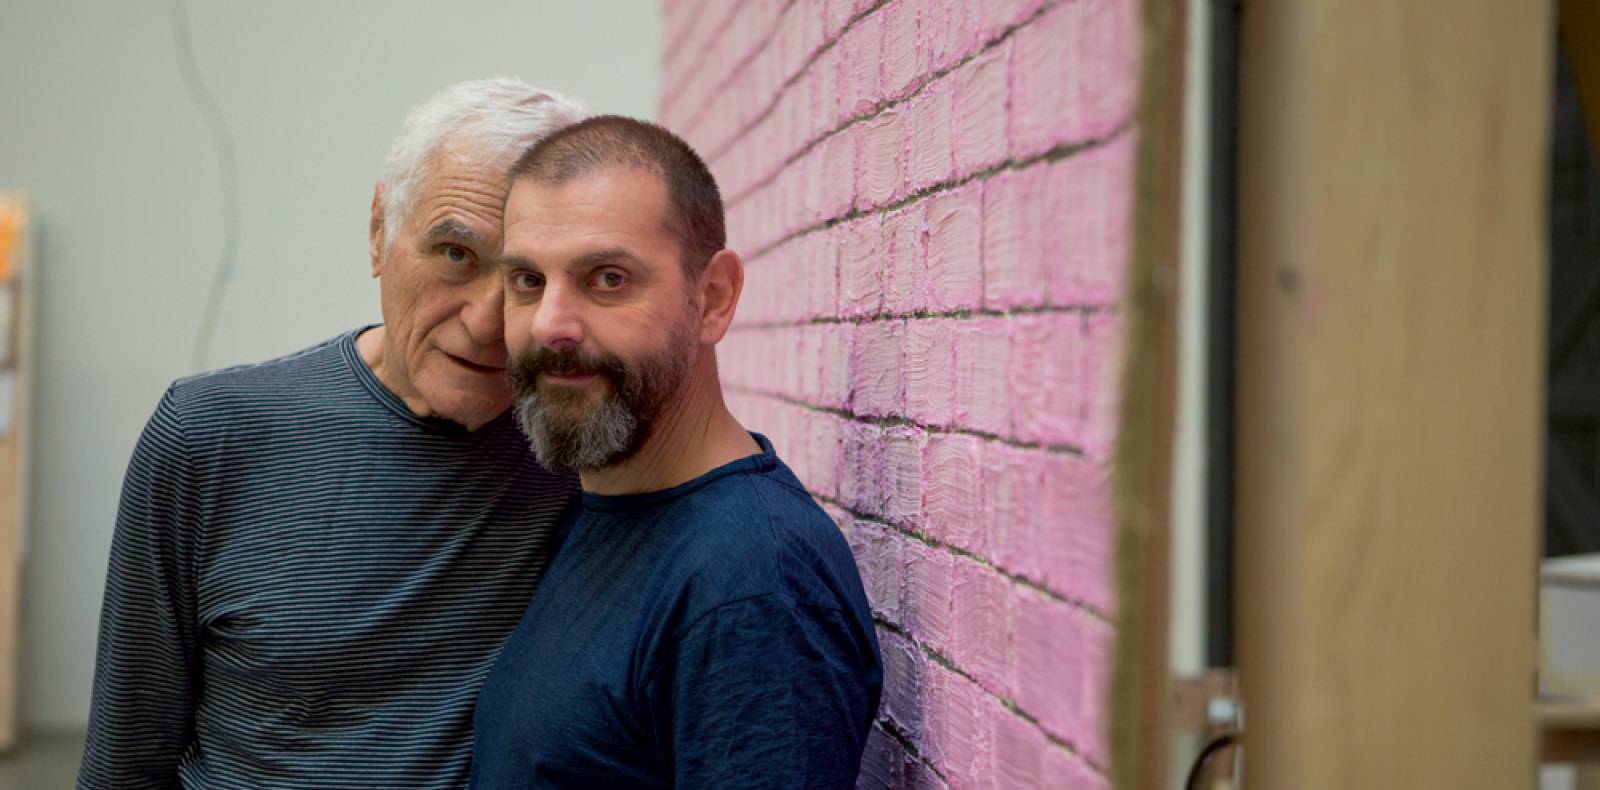 A momentous interview between the incredible artist Ugo Rondinone and the legendary poet John Giorno